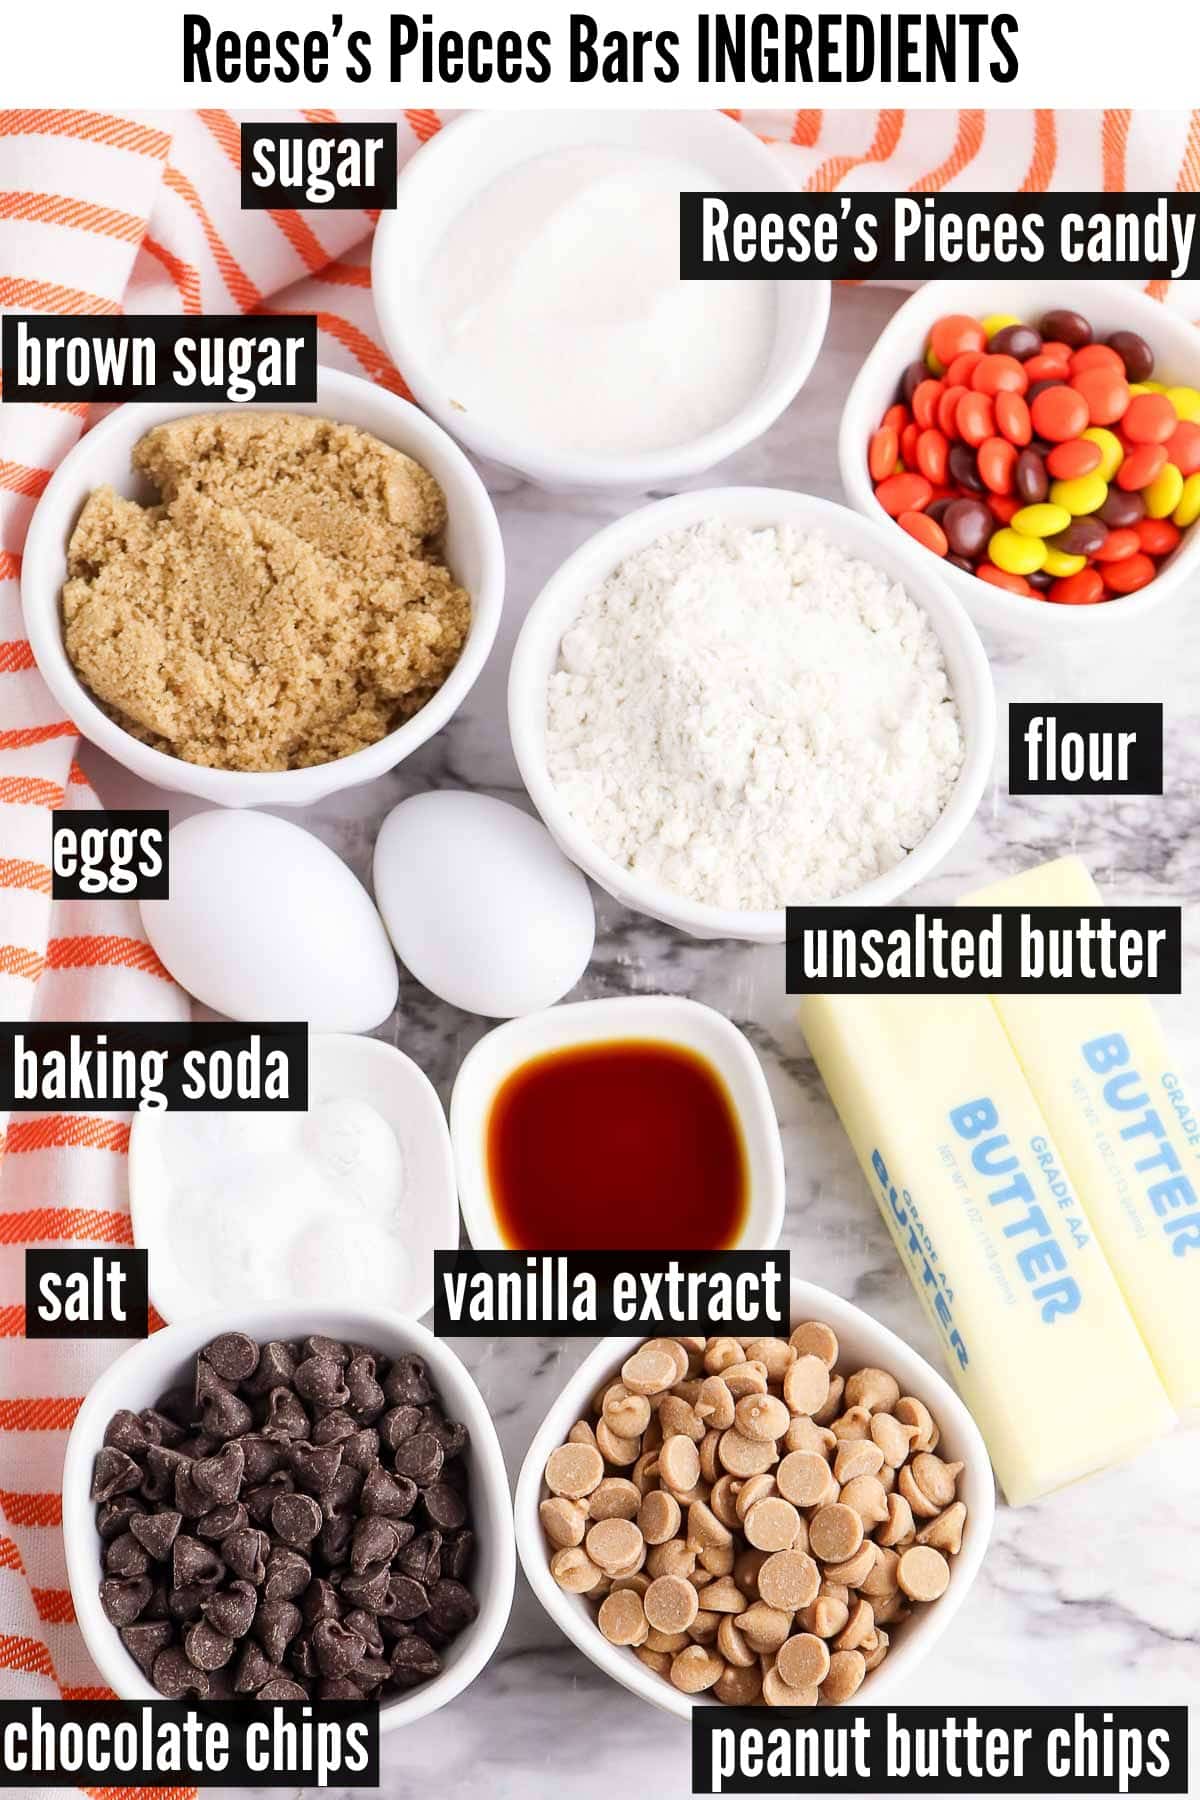 reese's pieces bars labelled ingredients.